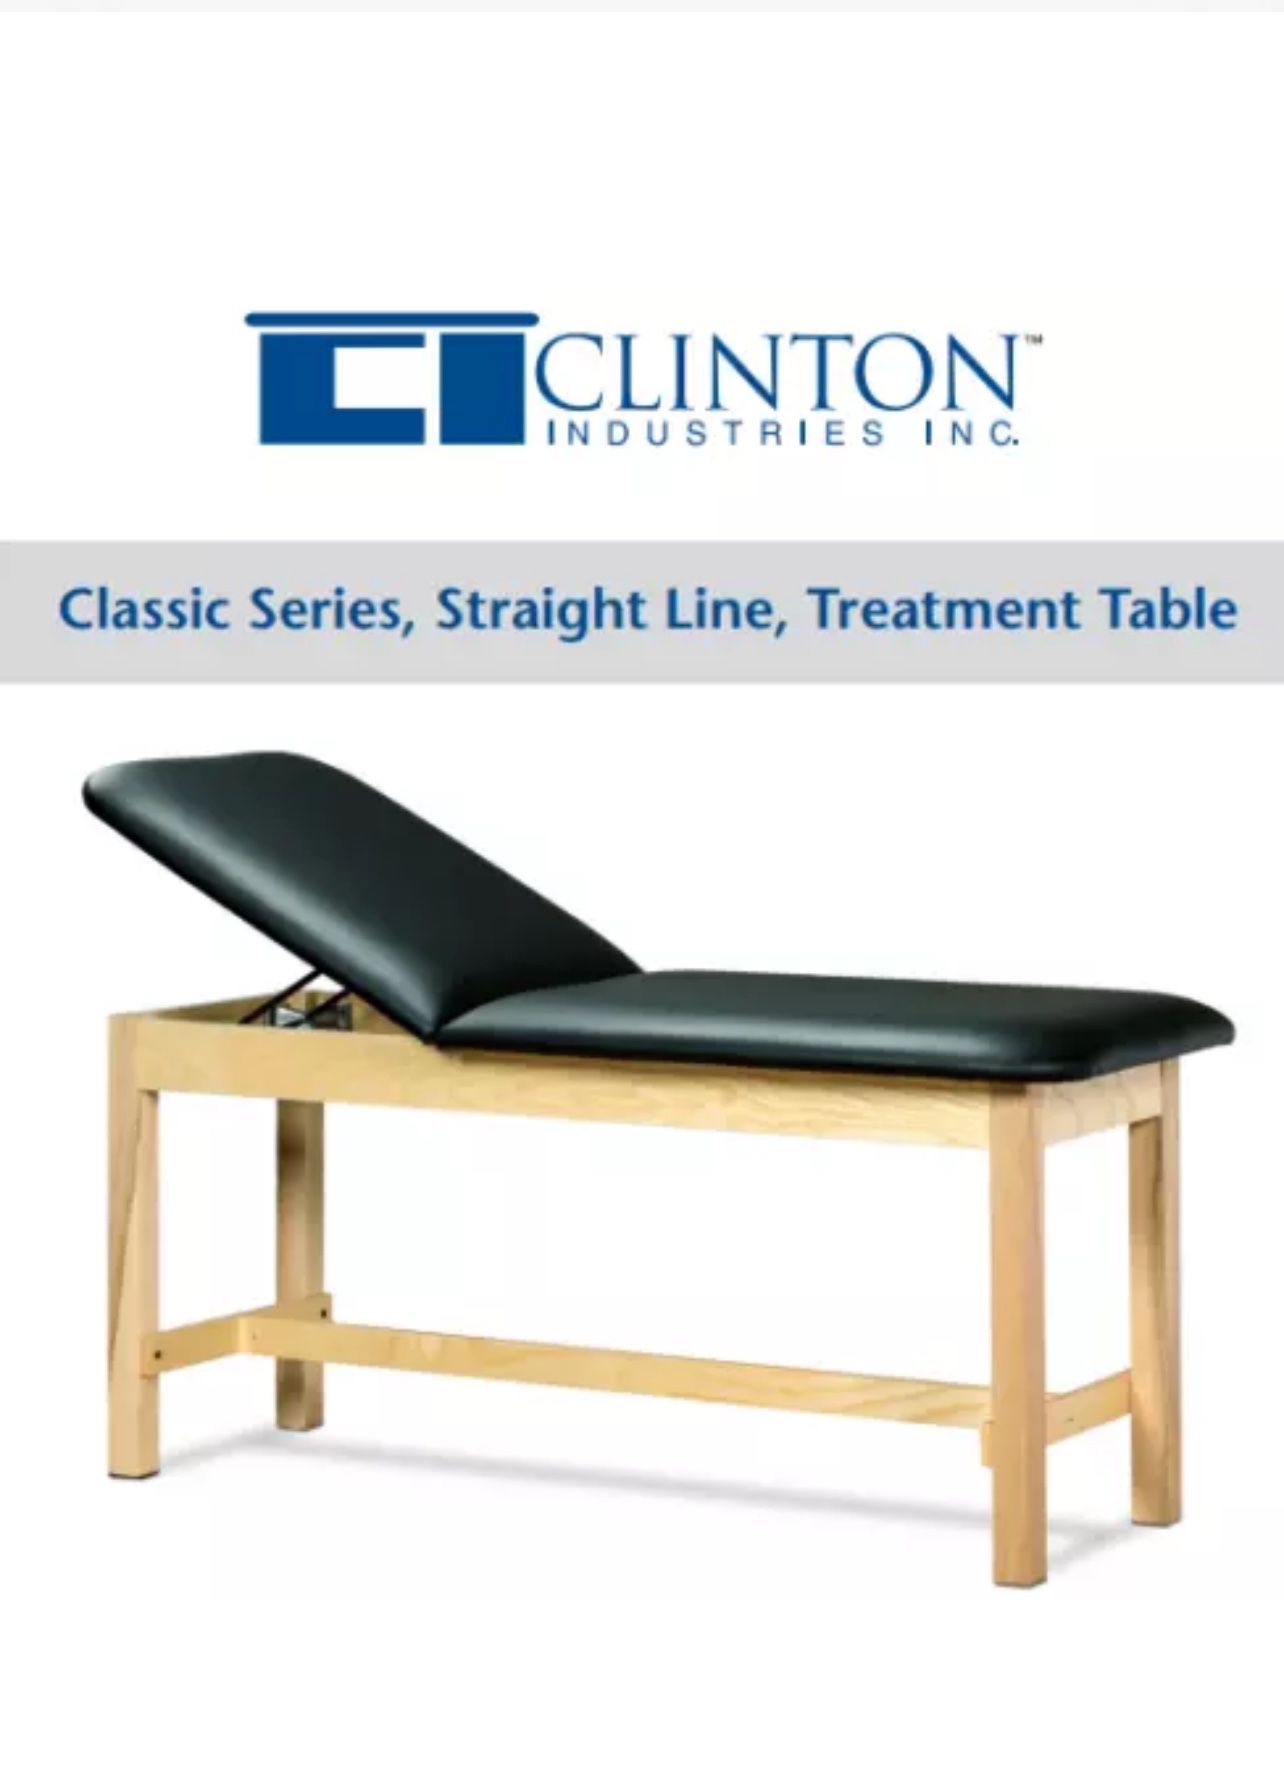 Medical Office Treatment Table